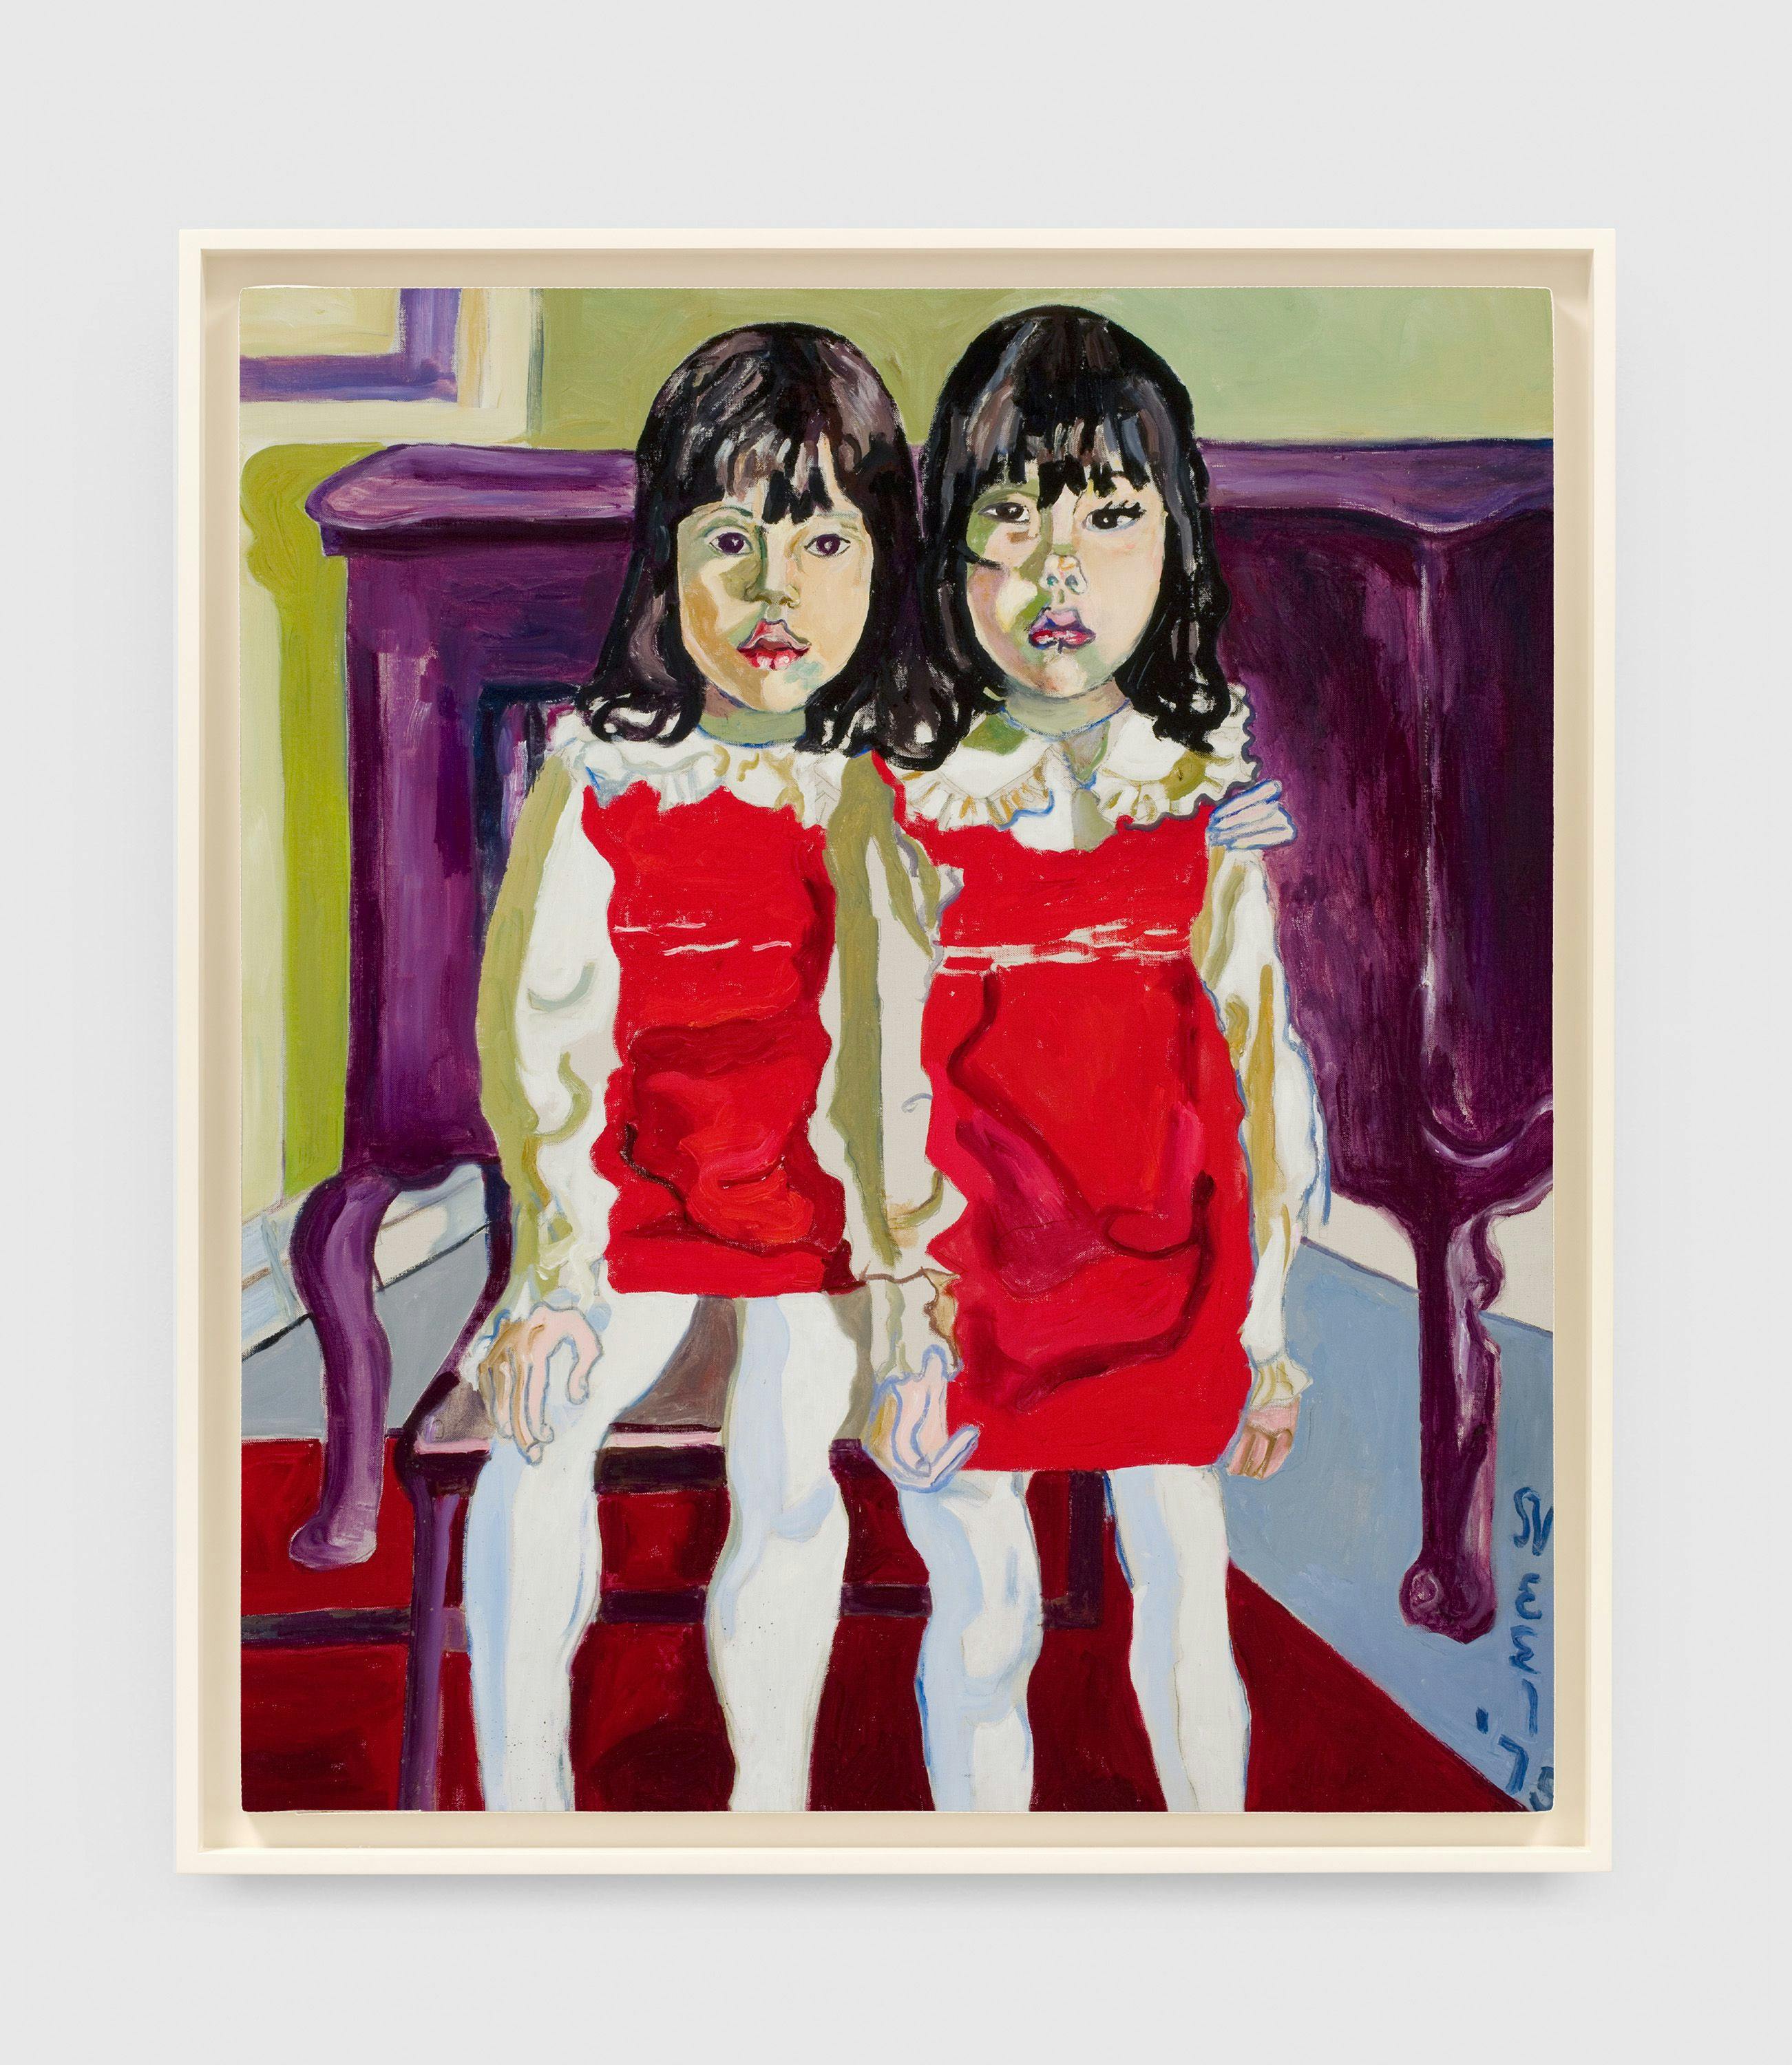 A painting by Alice Neel, titled The De Vegh Twins, dated 1975.